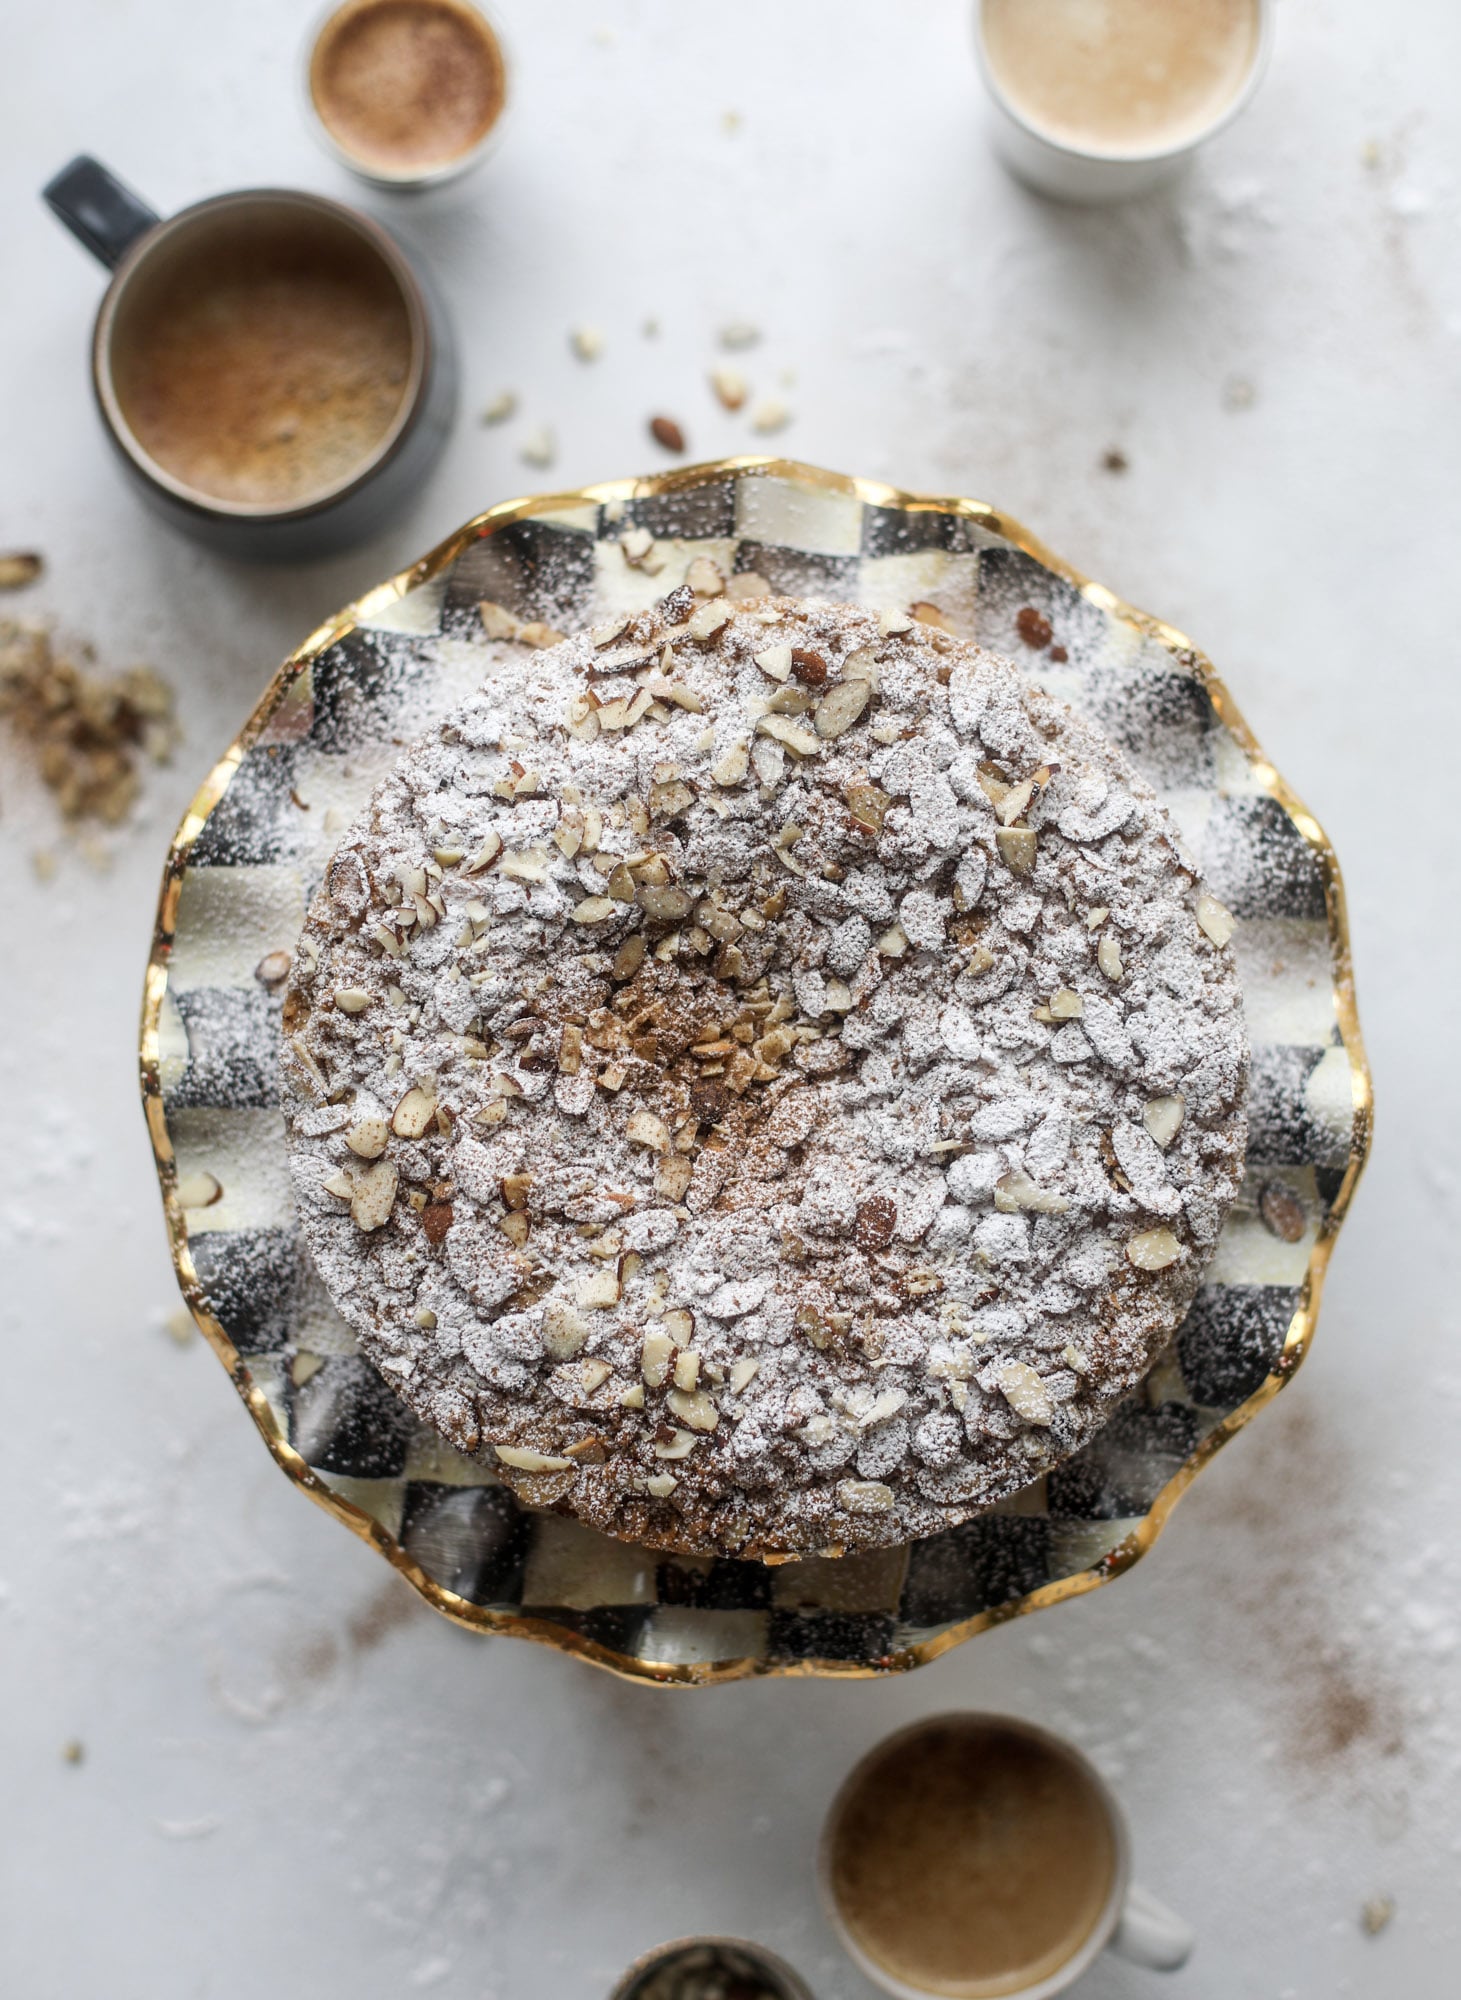 This almond crumb cake is so delicious and perfect for breakfast or dessert! It's full of delicious almond flavor and crunch and the crumb on top is so thick and perfect. It's like an almond croissant on steroids. I howsweeteats.com #almond #crumb #cake